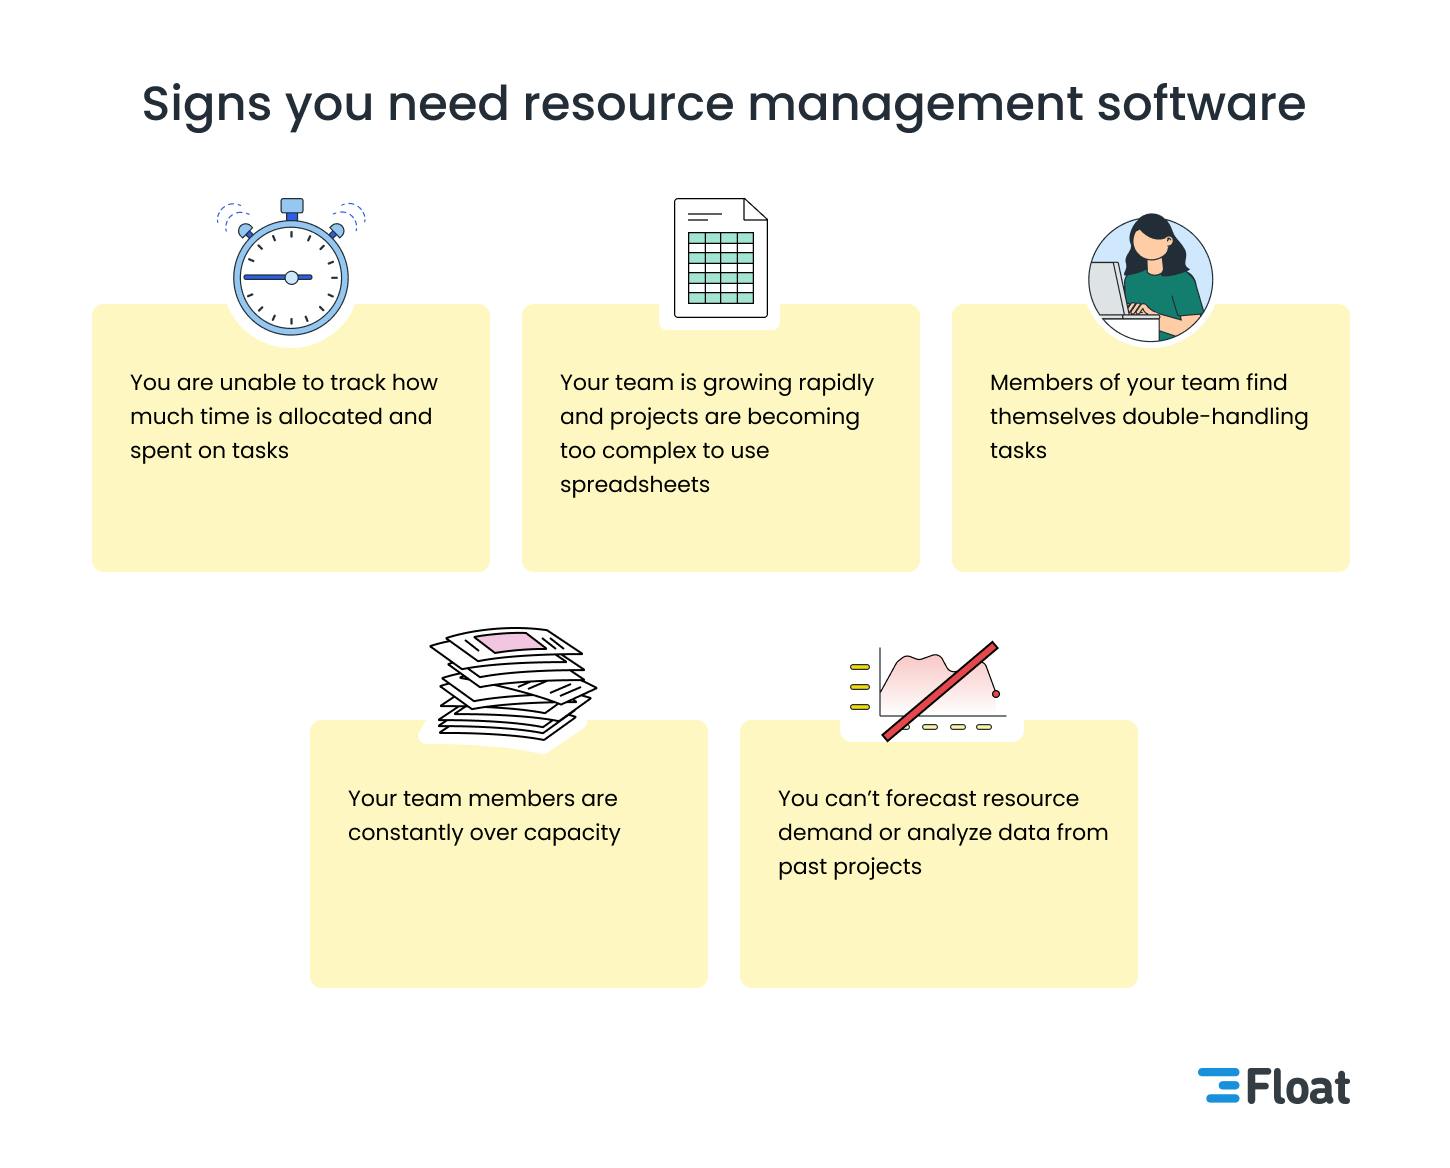 5 signs you need resource management software 